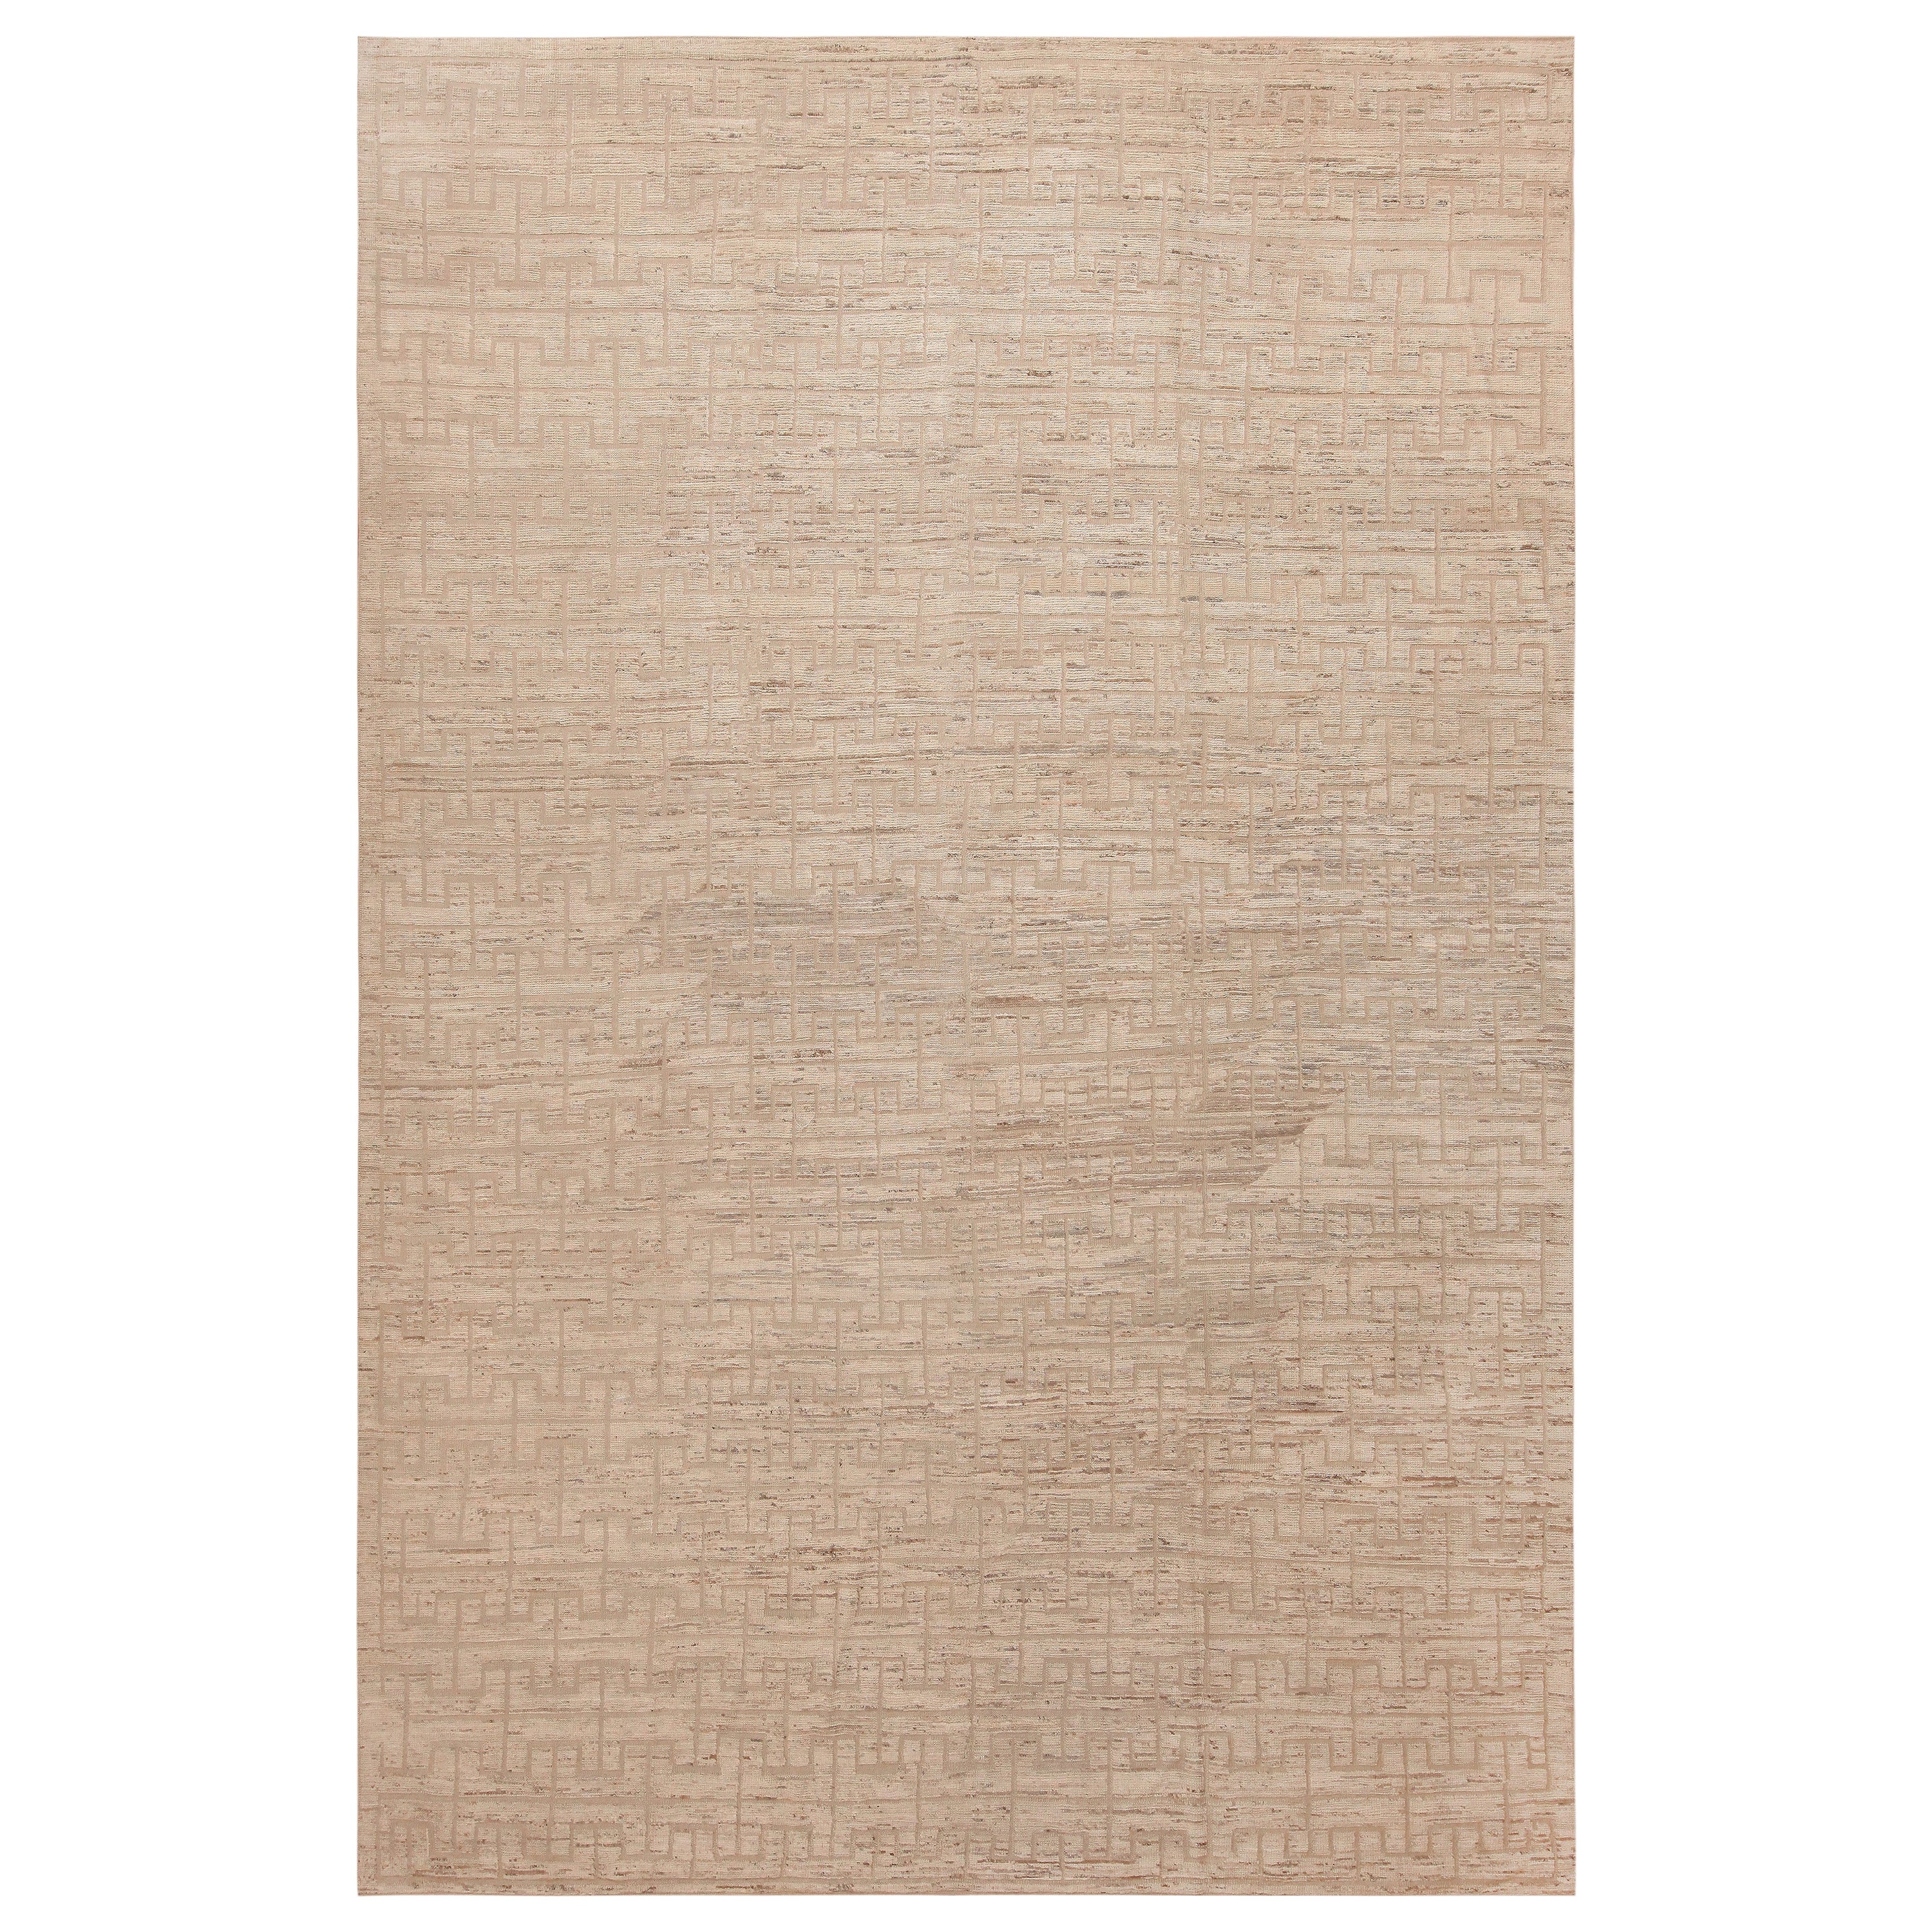 Nazmiyal Collection Geometric Textured Modern Rug. 9 ft 7 in x 14 ft 7 in  For Sale